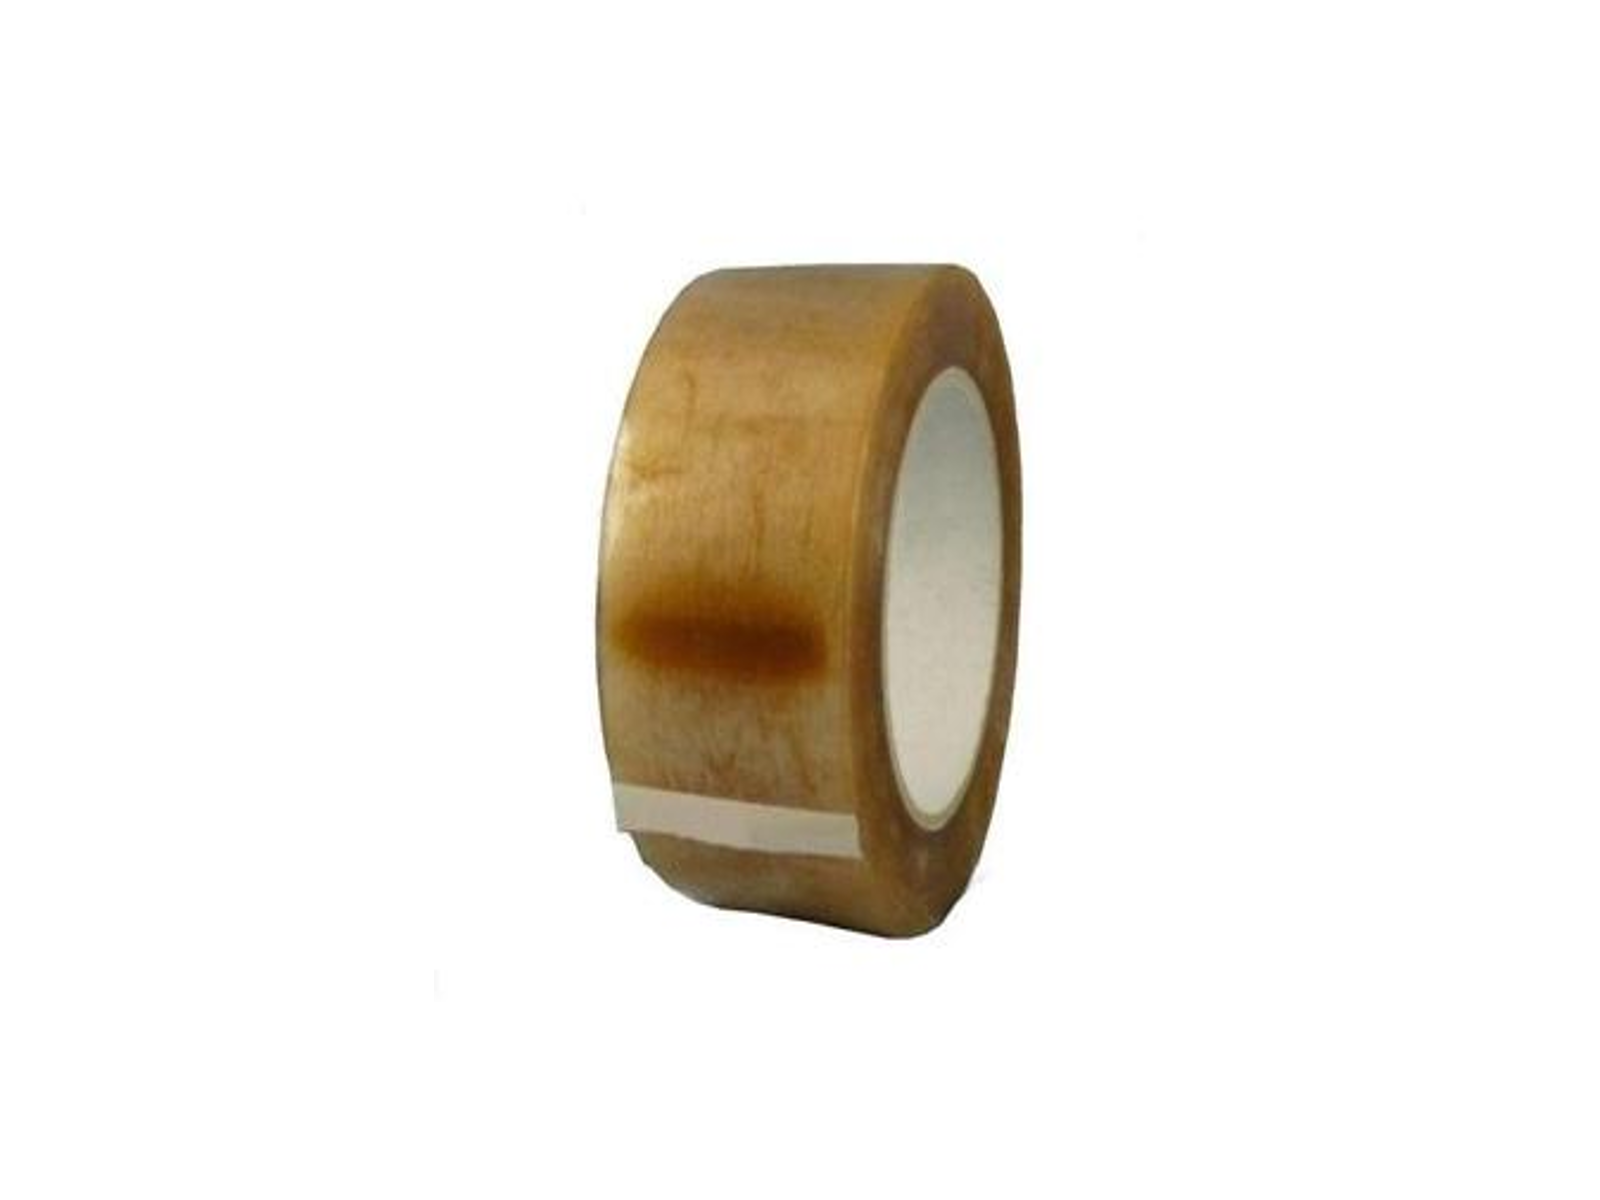 CARTON SEALING TAPE HAND NATURAL RUBBER CLEAR 3&quot;X 110